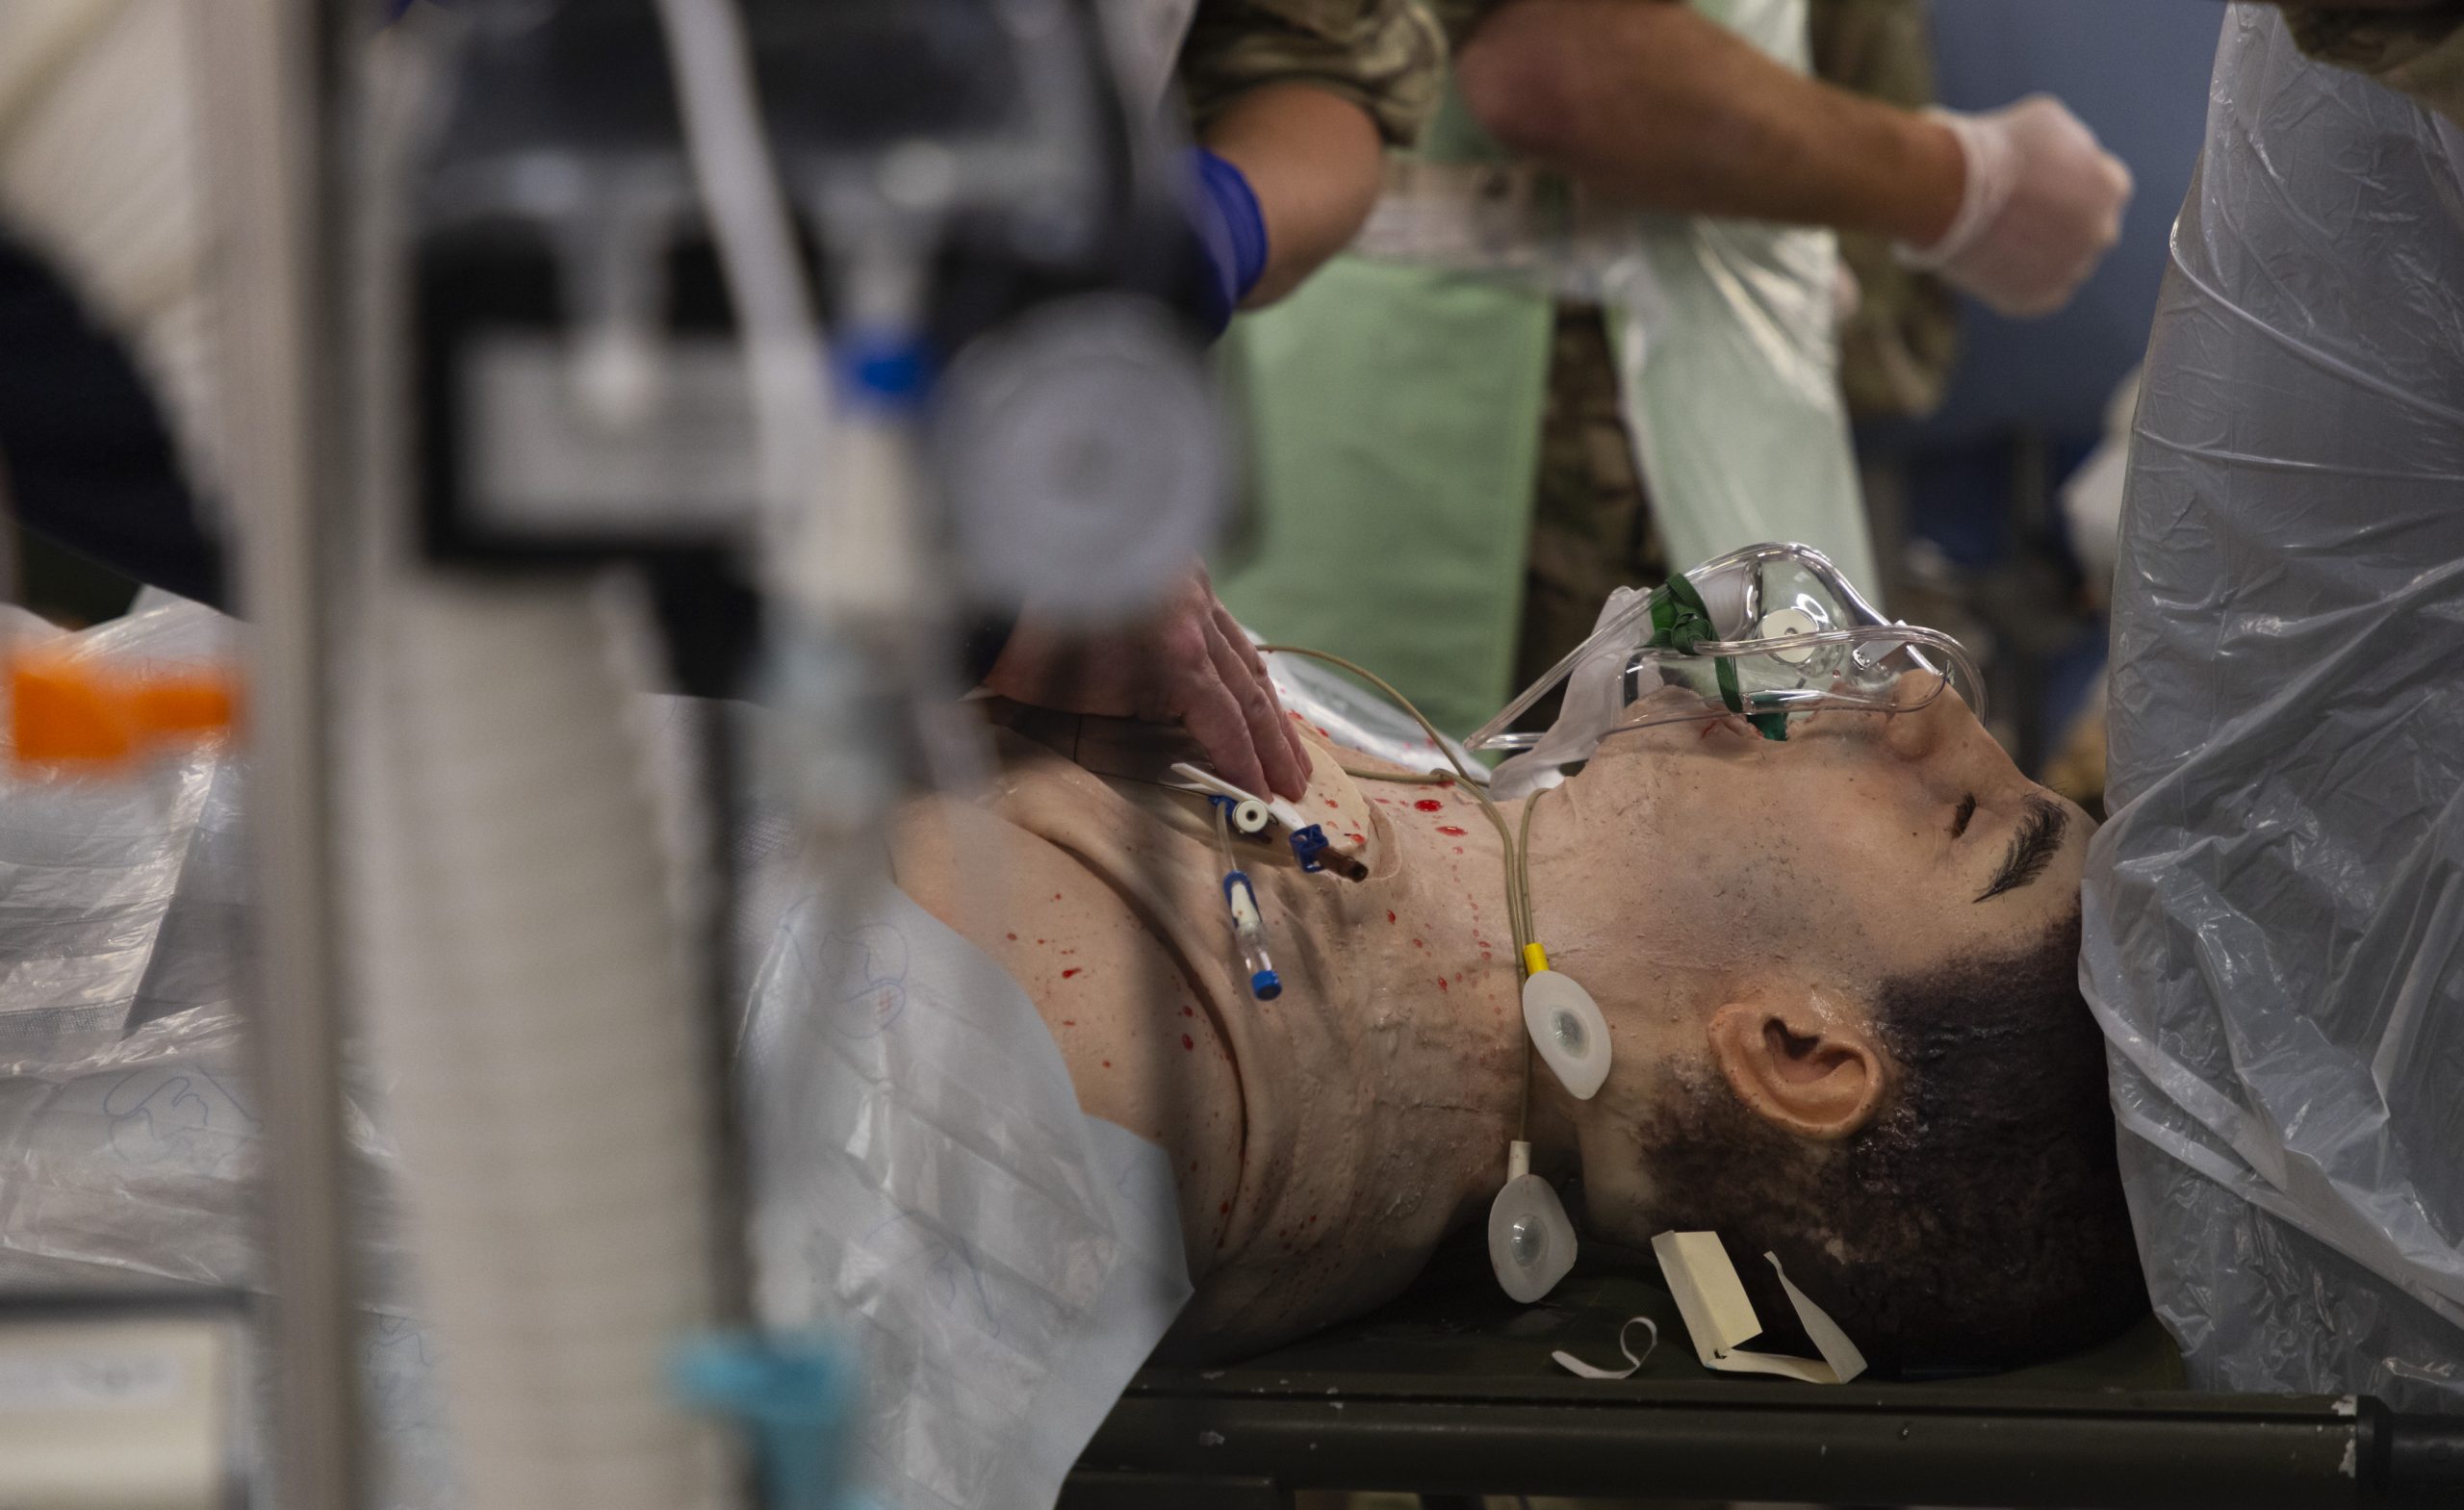 World-Leading Surgical Mannequin (SAM) Used To Train Military Surgeons On Immersive Exercise For First Time